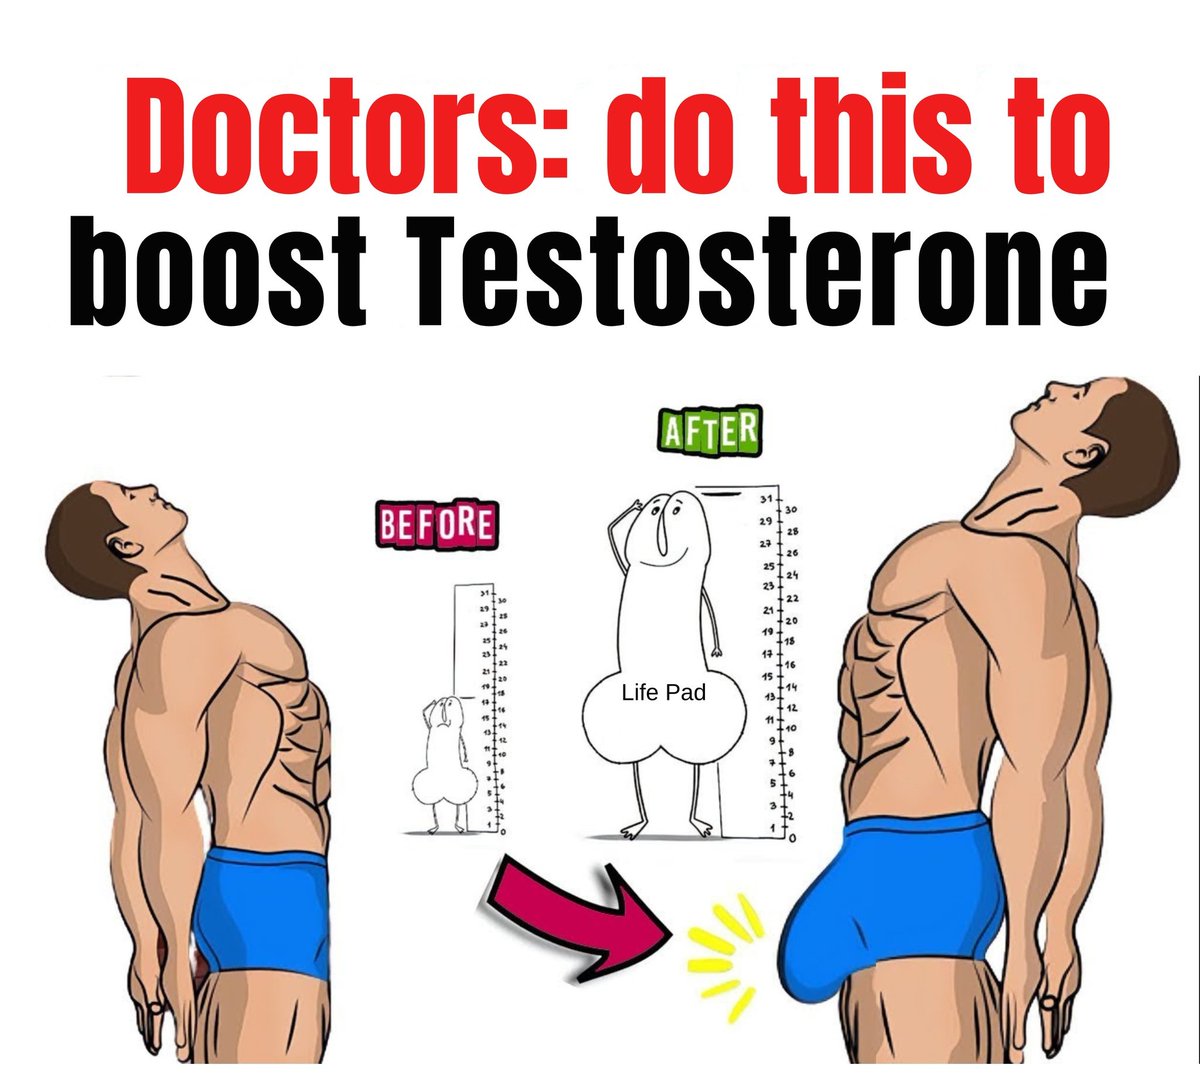 Doctors recommend this exercises to boost Testosterone, last longer and improve your overall well-being  🍆